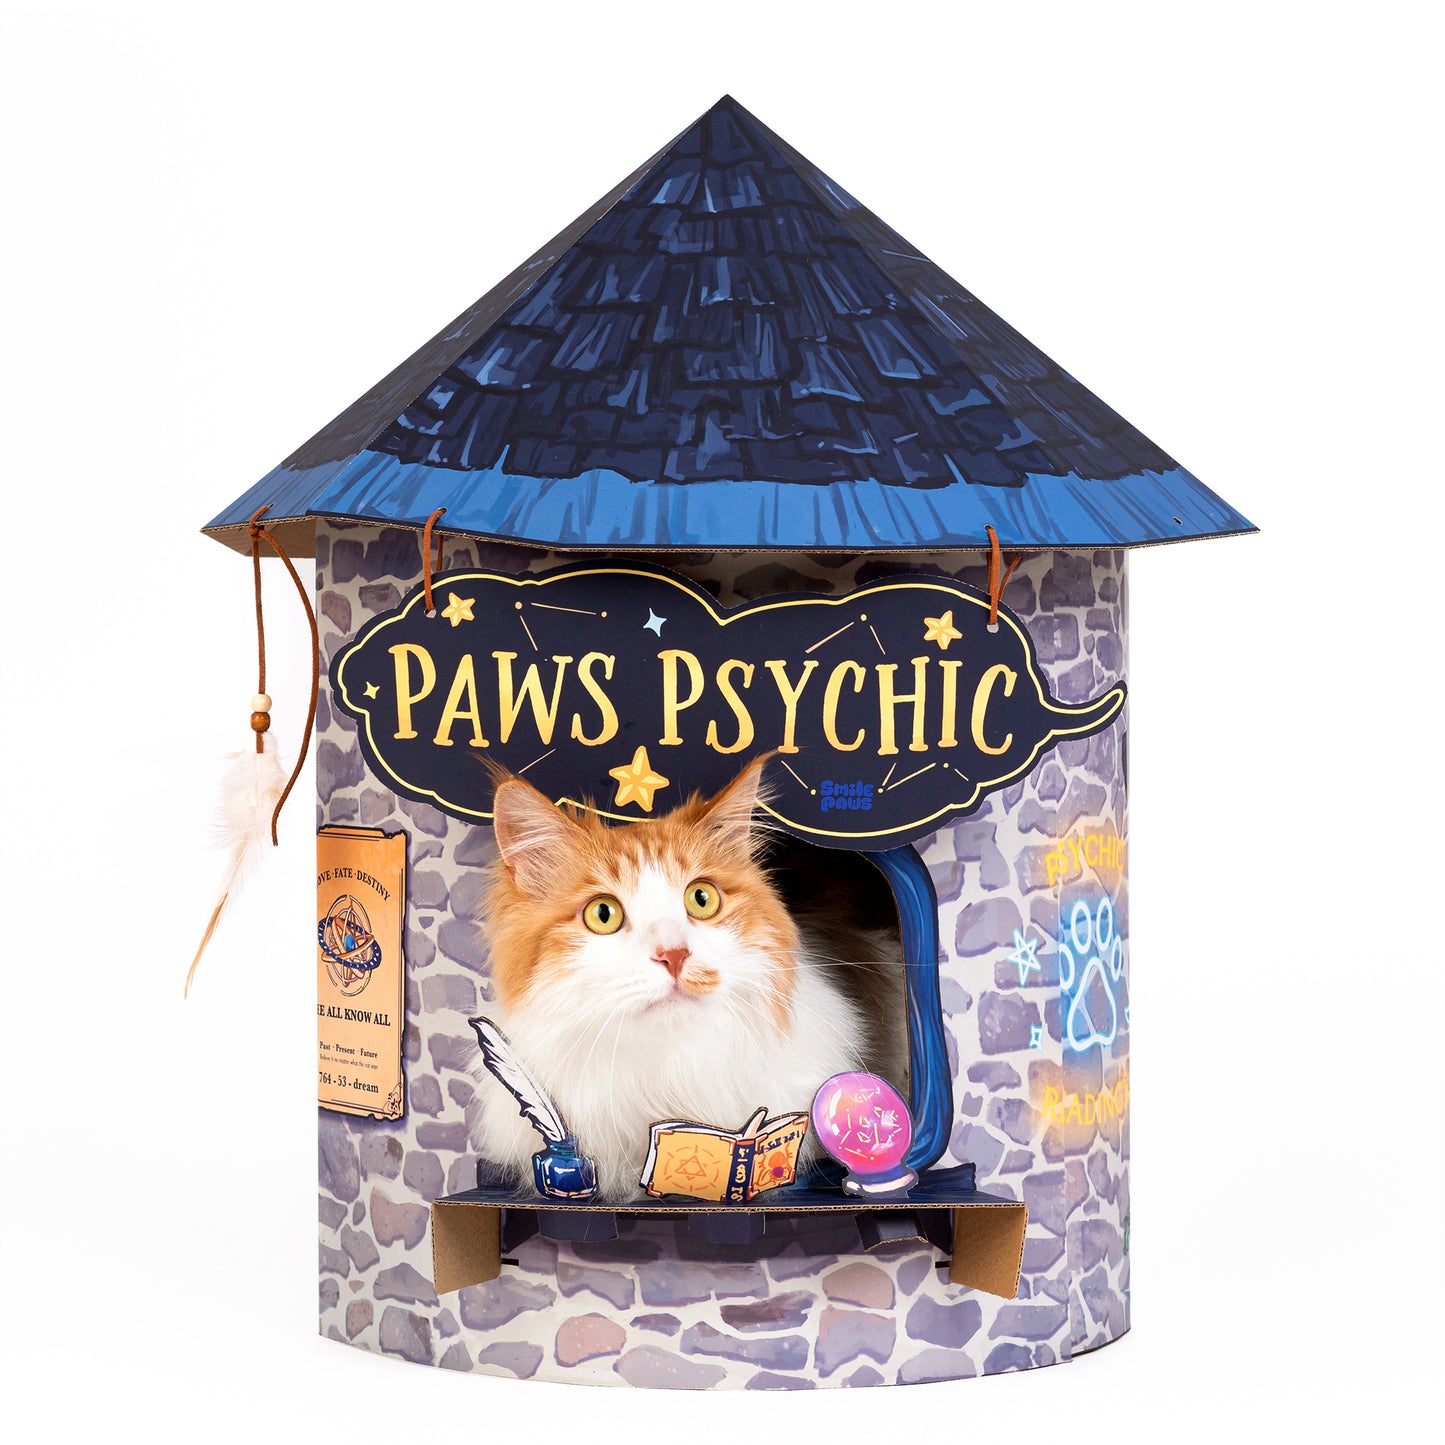 Paws Psychic Store